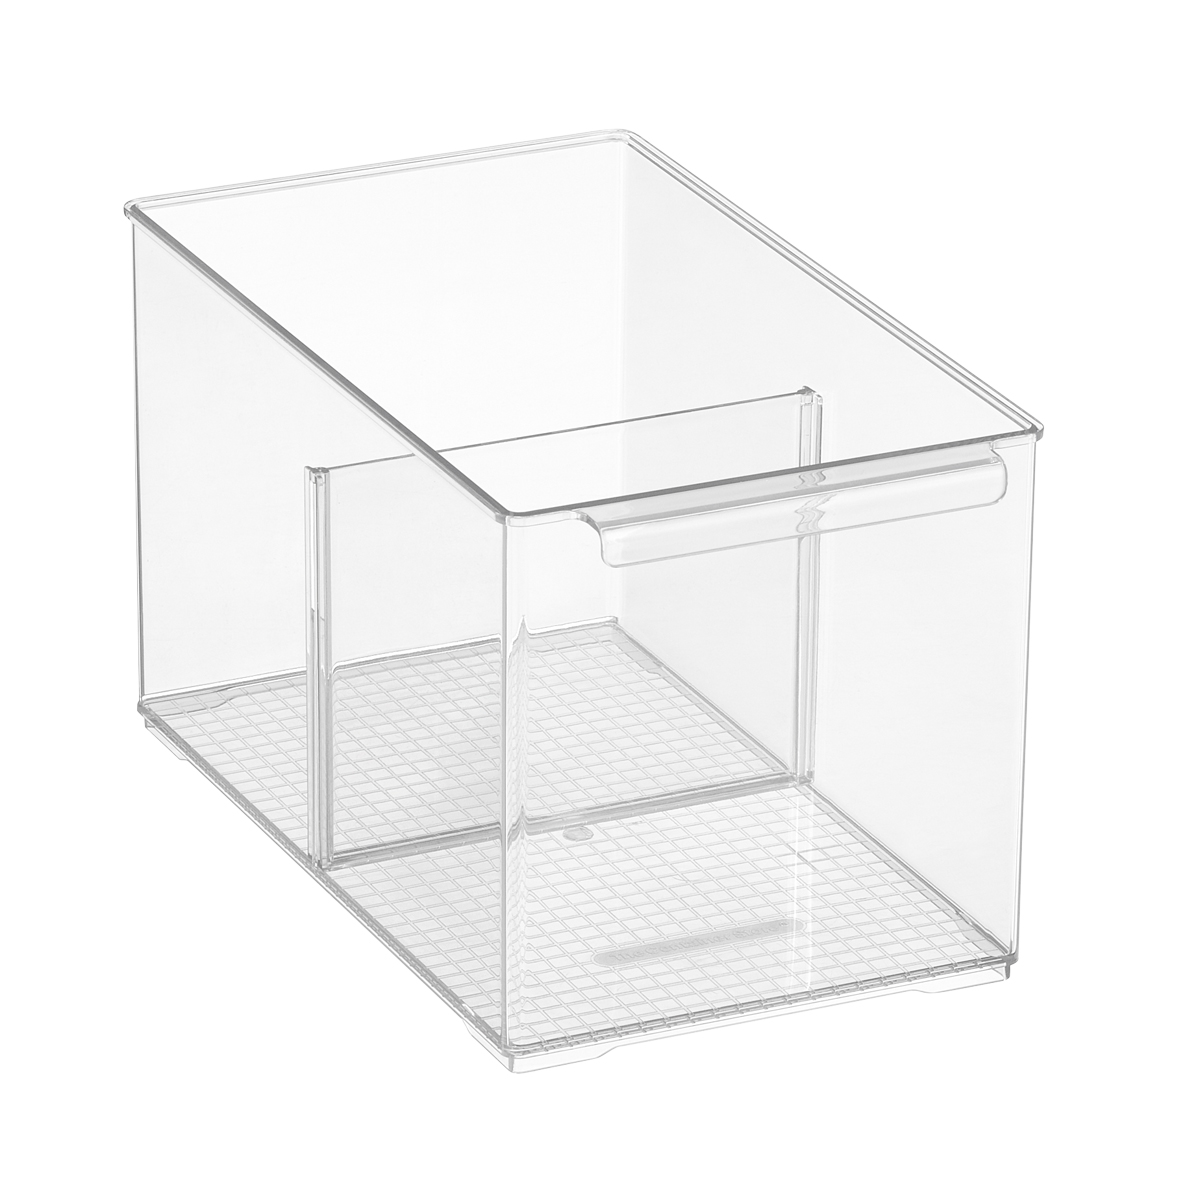 https://www.containerstore.com/catalogimages/439725/10087163_11_Inch_Modular_Pantry_Bin_.jpg